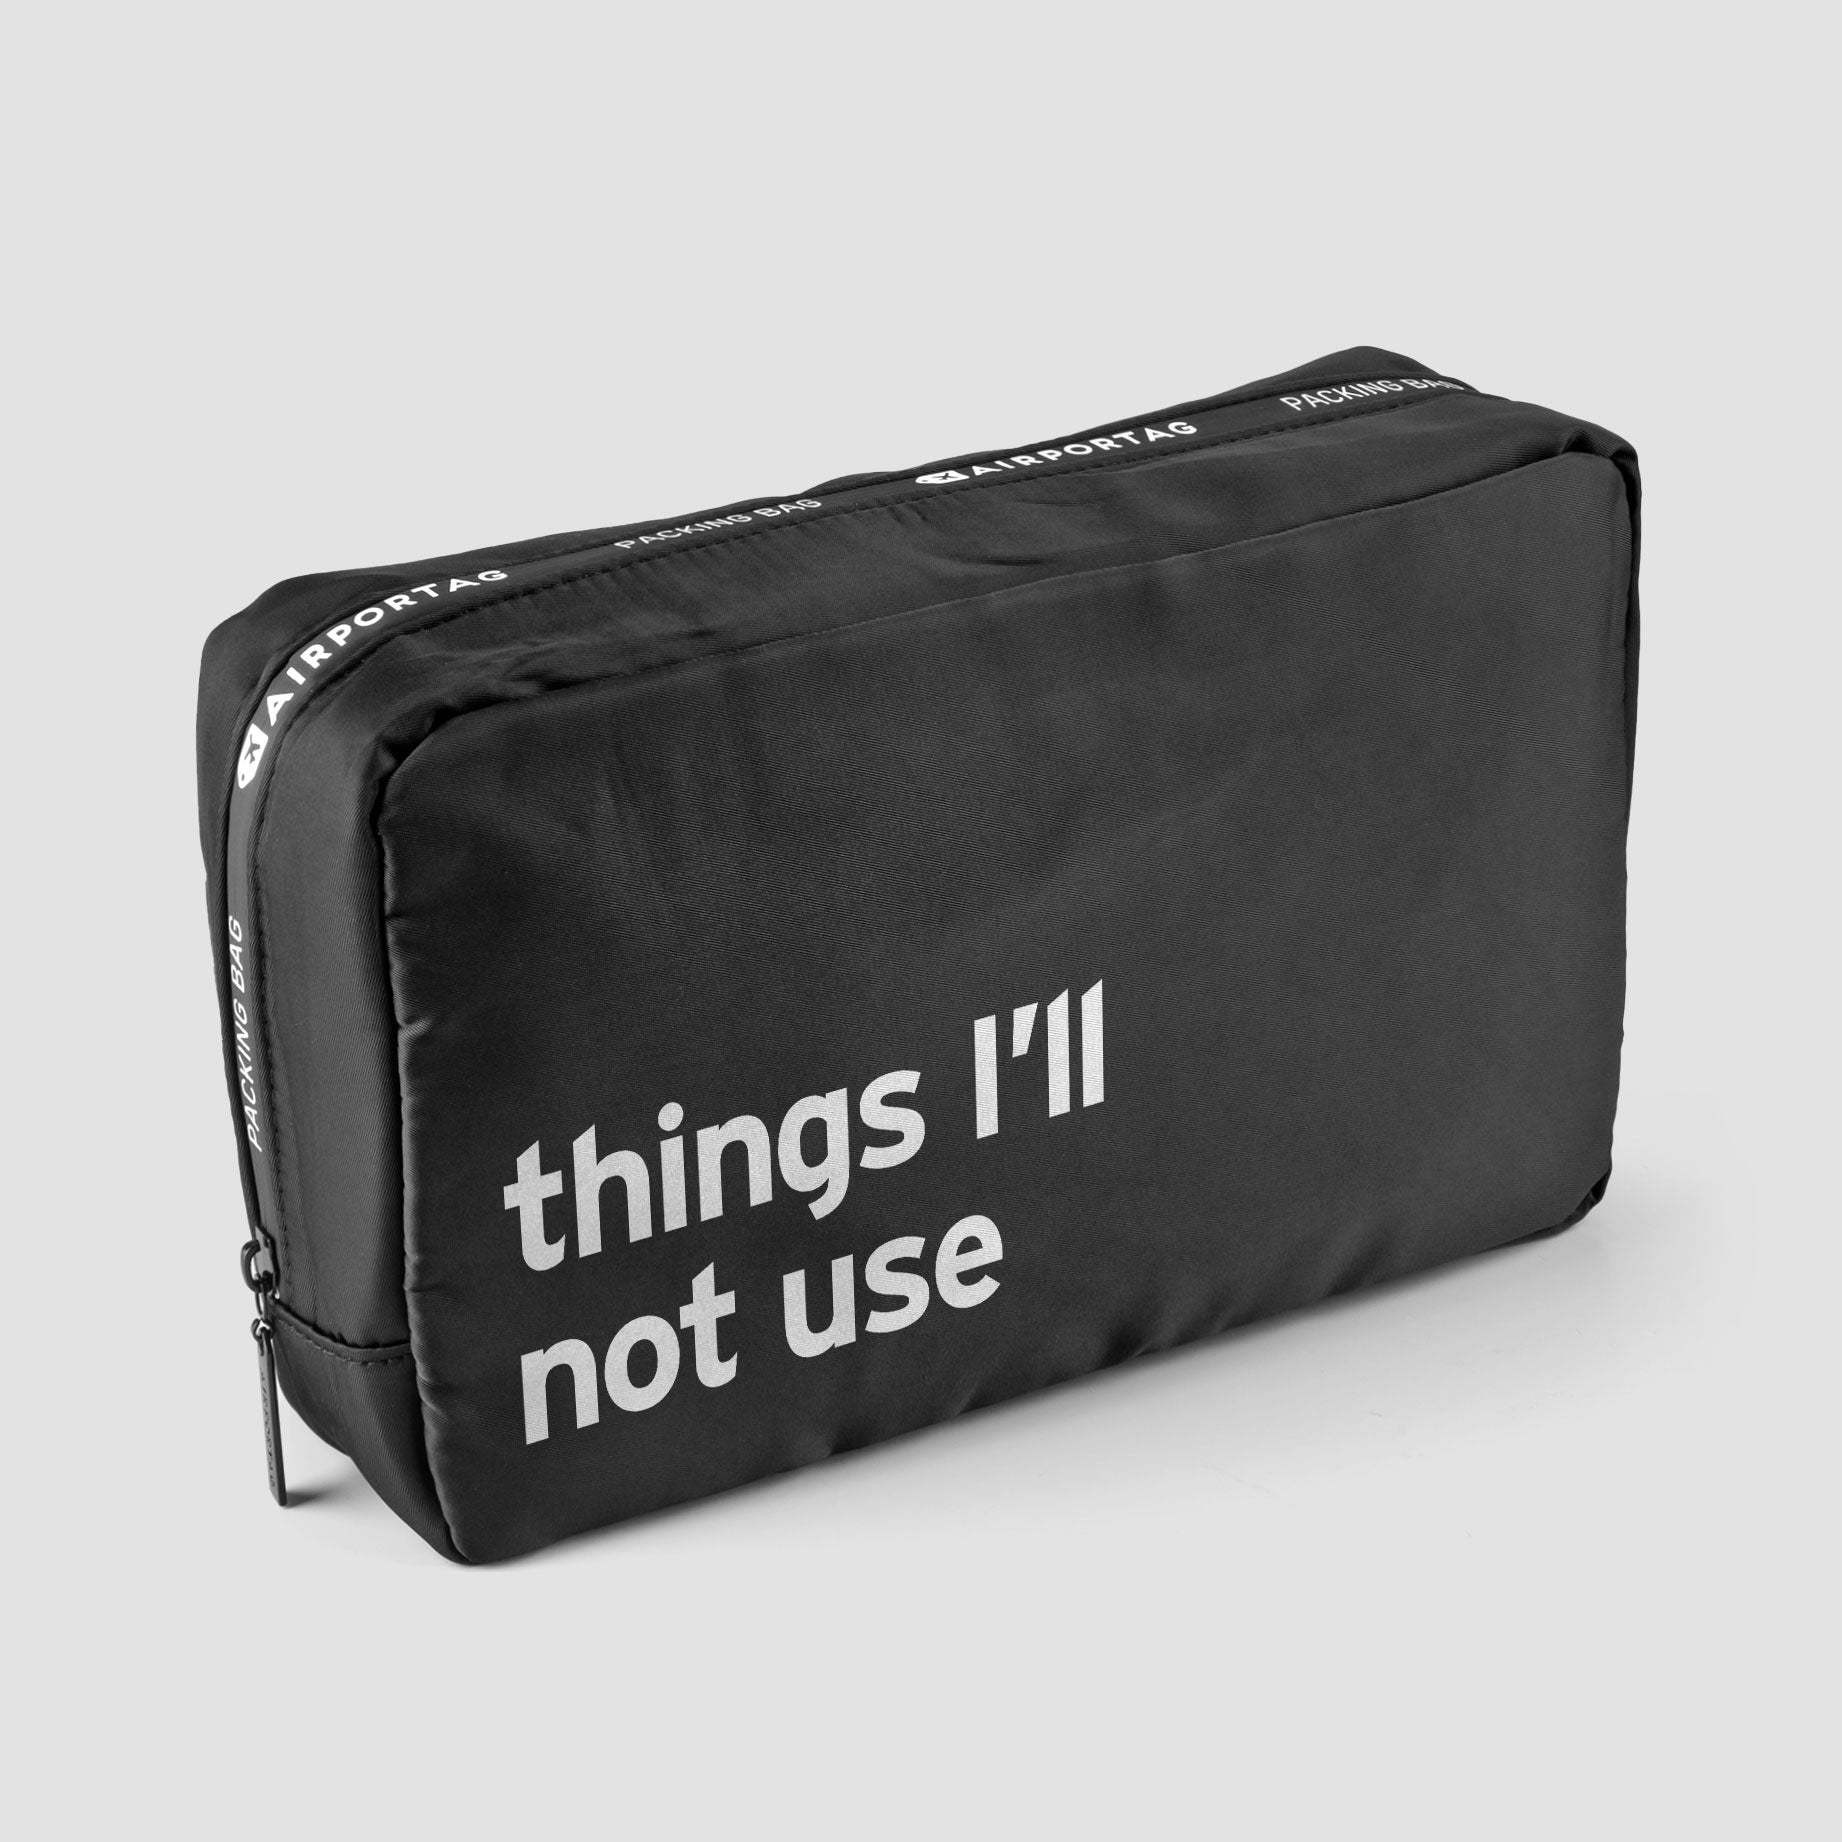 Things I'll not use - Packing Bag